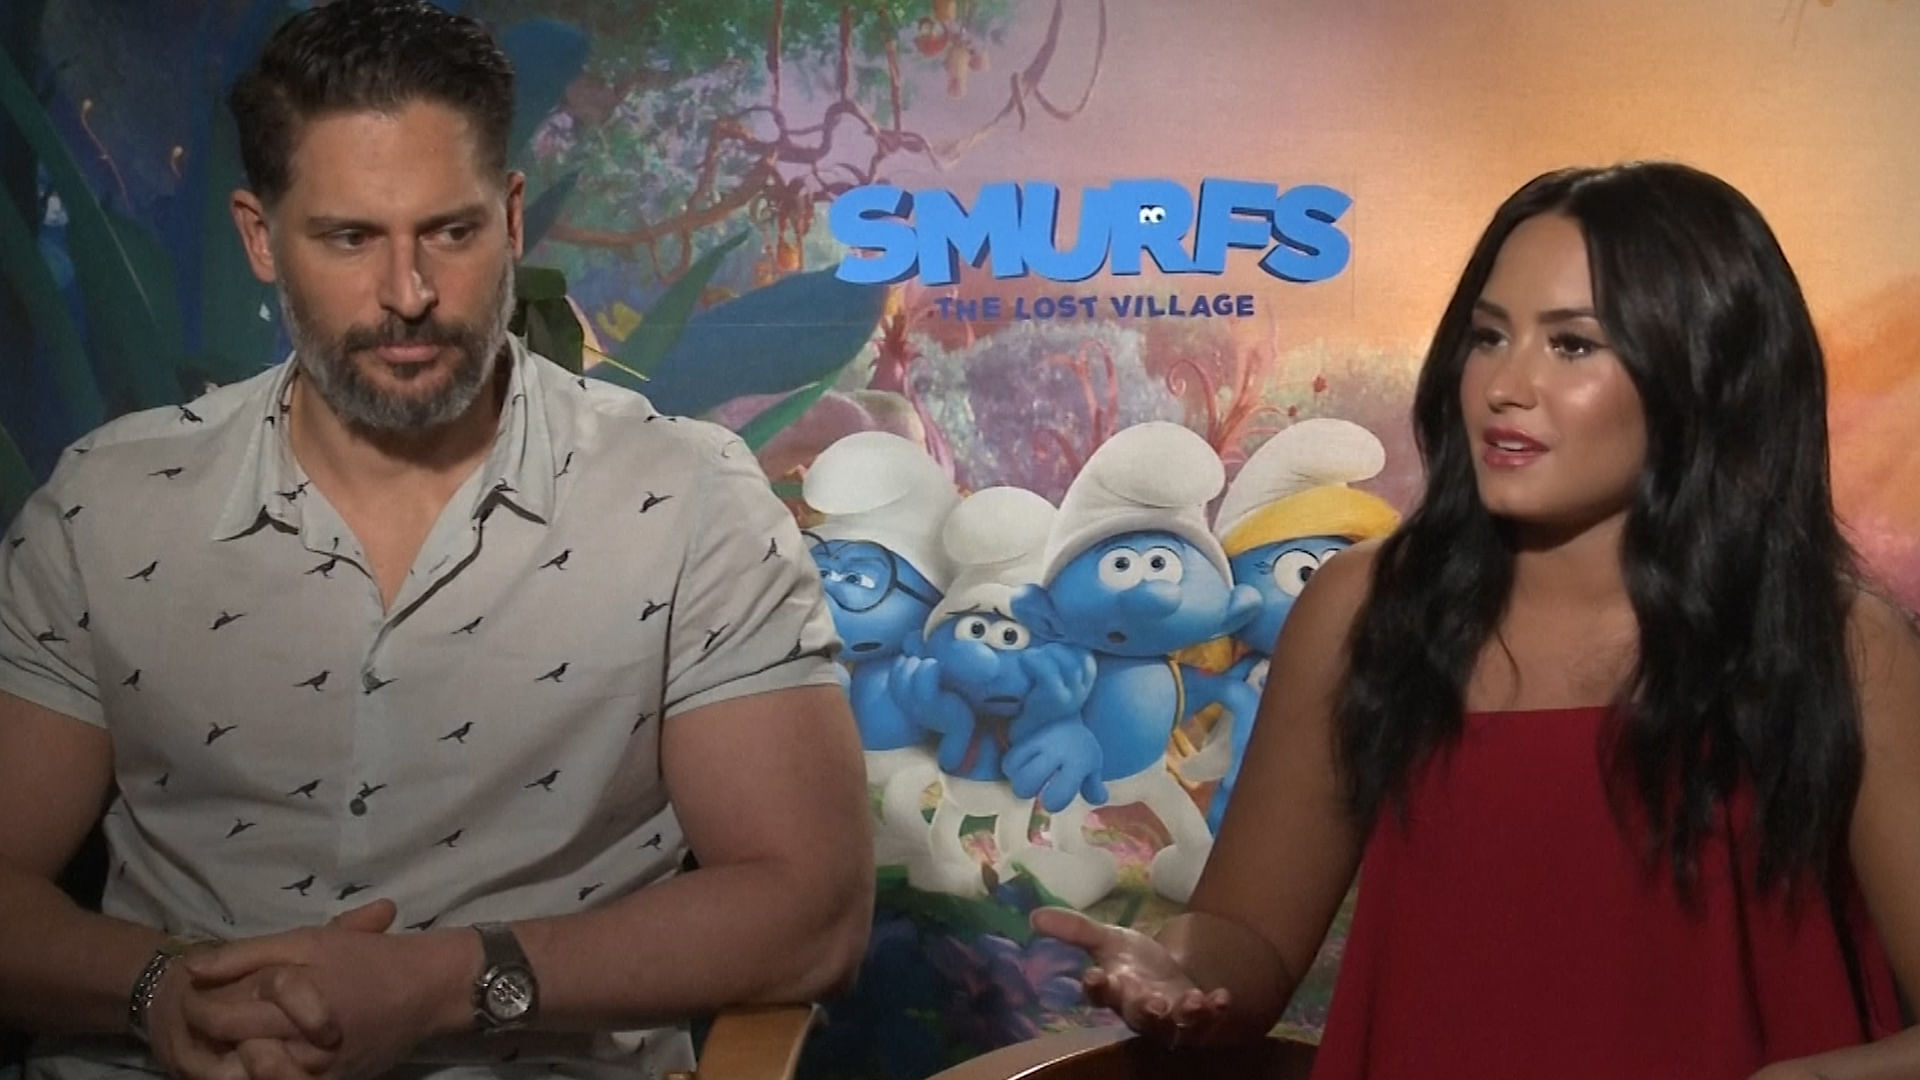 Joe Manganiello voices the tiny blue character named ‘Hefty’ in “Smurfs: The Lost Village” and singer/actor Demi Lovato lends her voice to Smurfette. (Photo: AP Screengrab)